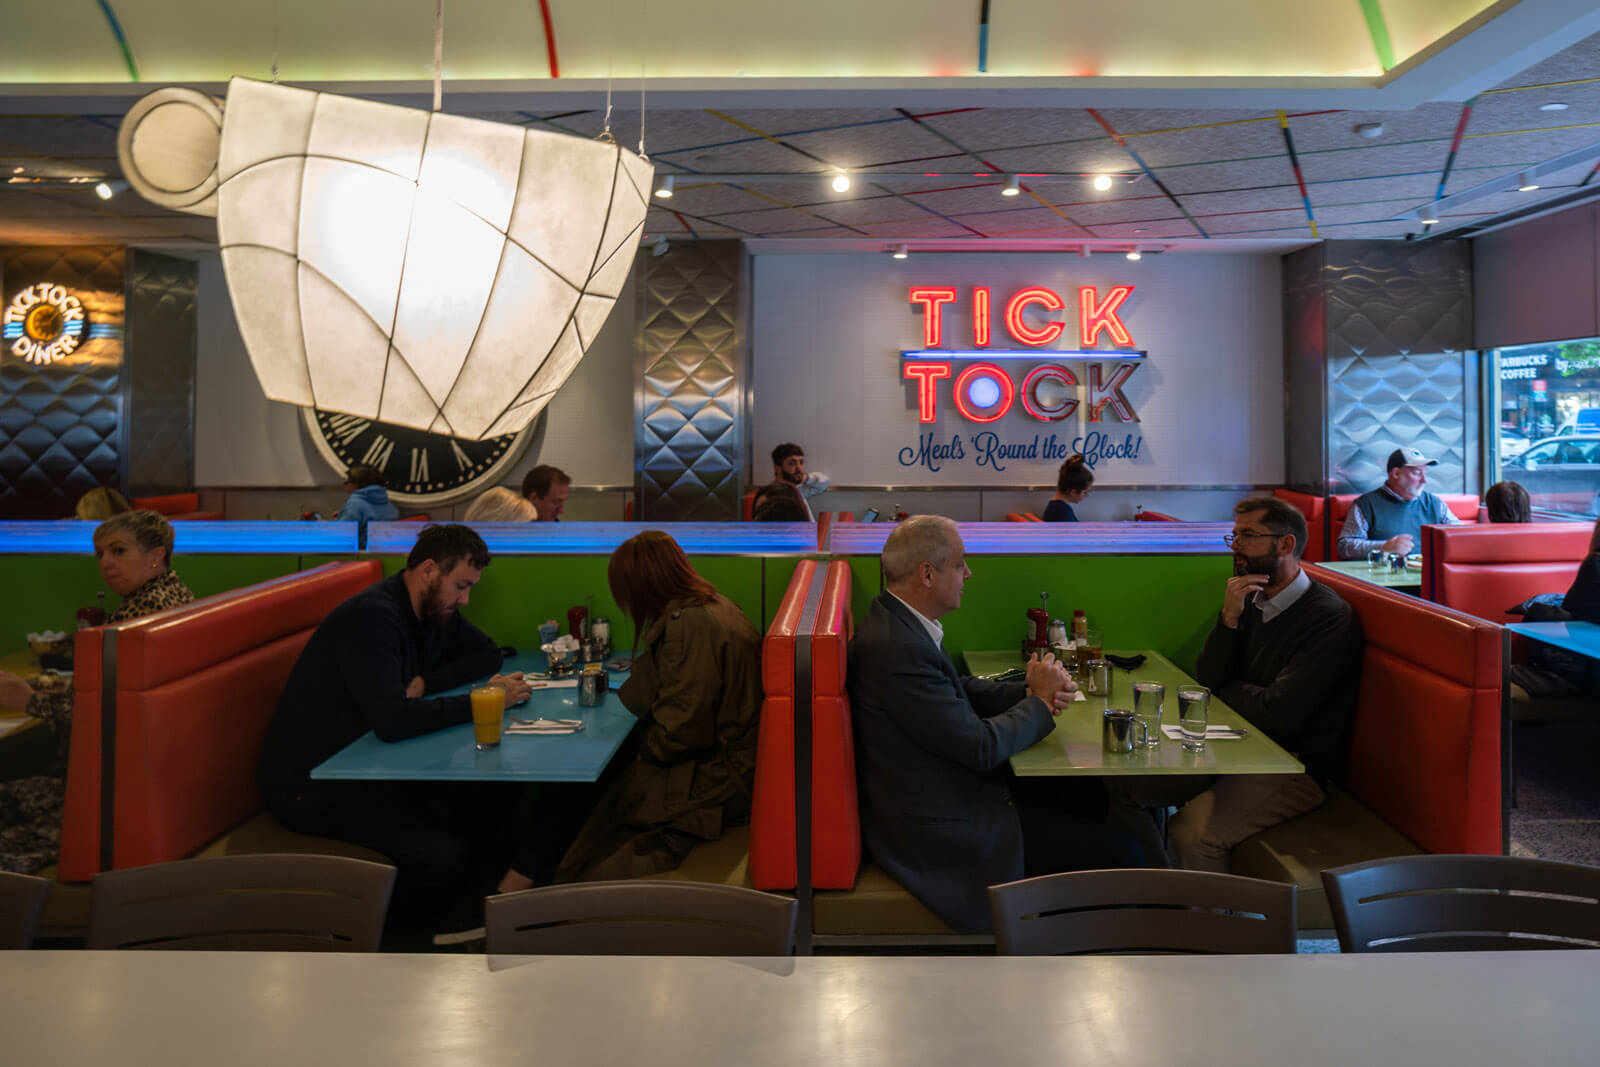 interior of tick tock diner in nyc